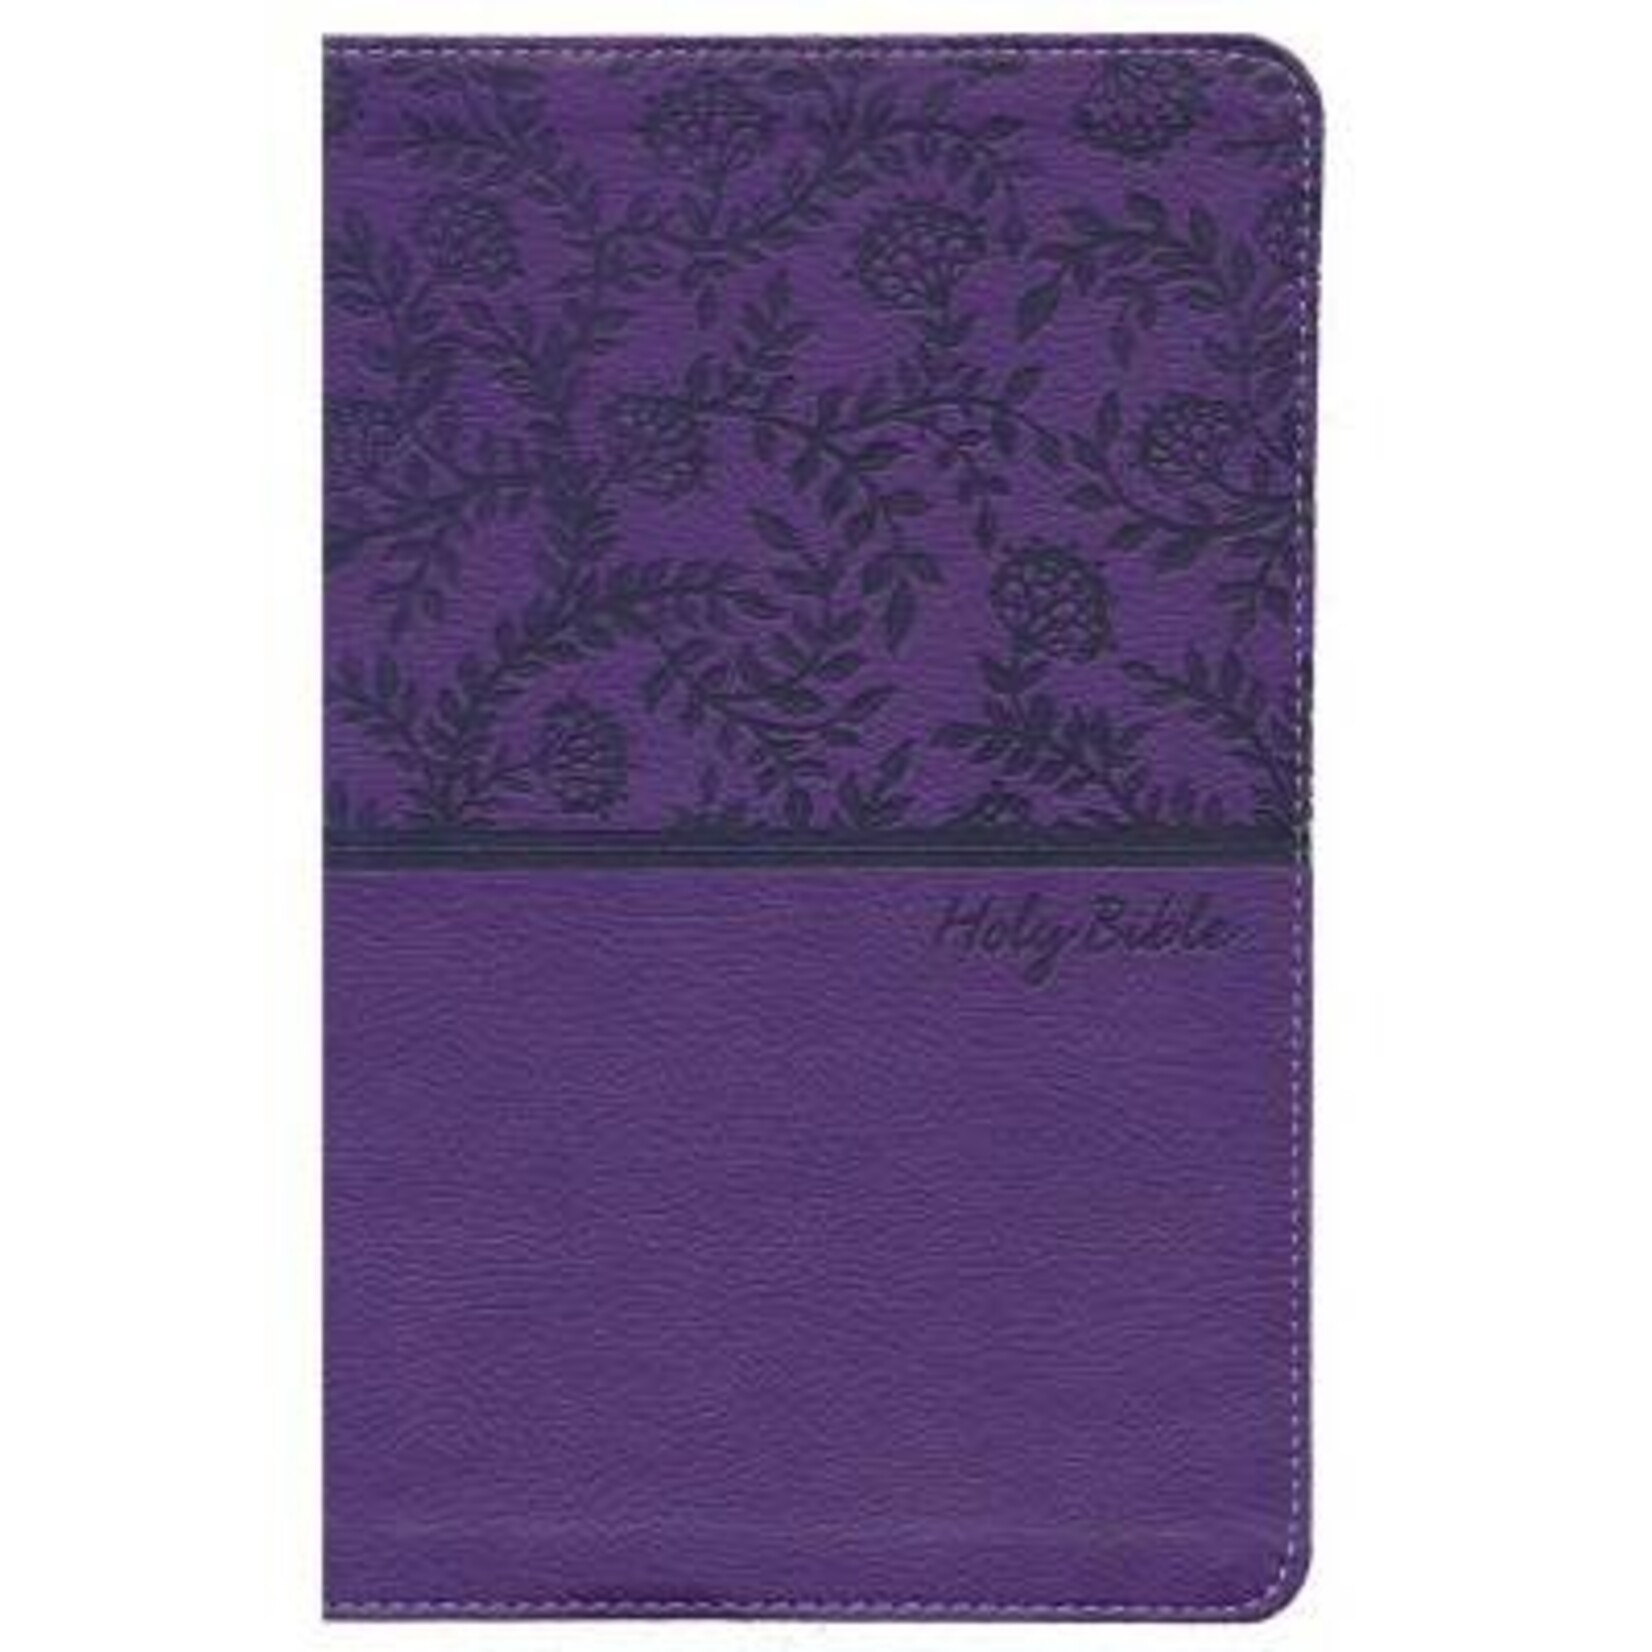 Holy Bible (NKJV) New King James Version Deluxe Gift Bible - Purple